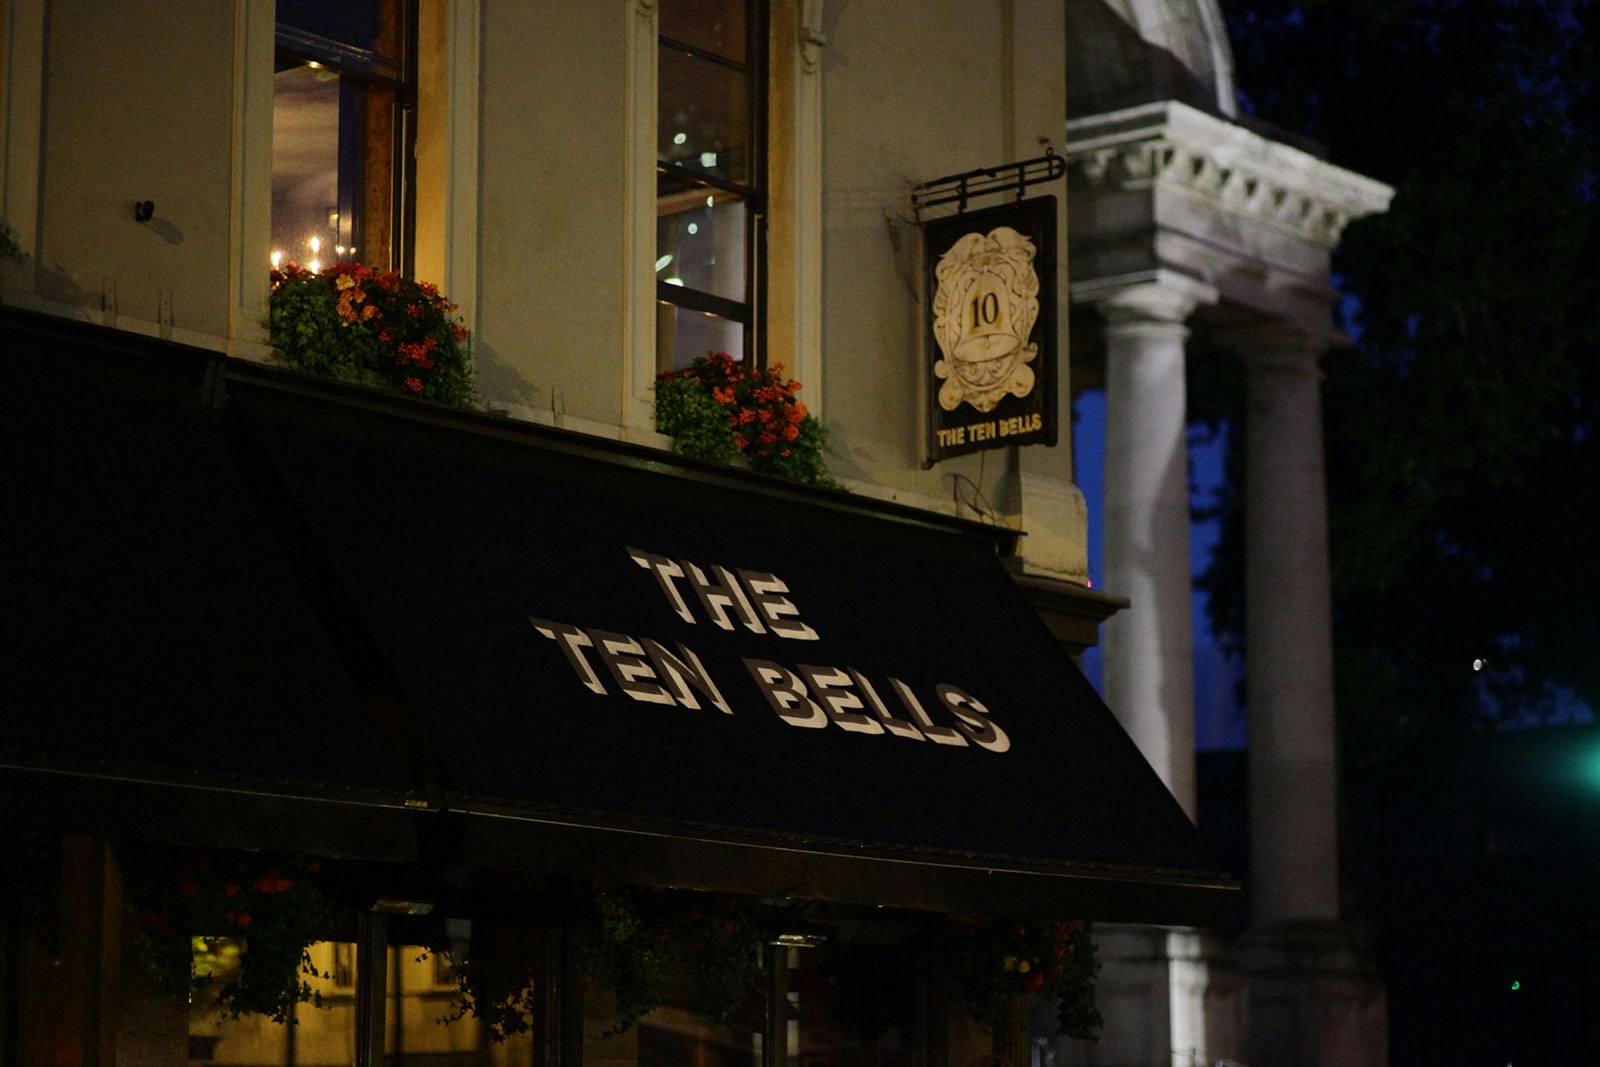 The Ten Bells - The Upstairs Cocktail Bar at The Ten Bells image 5